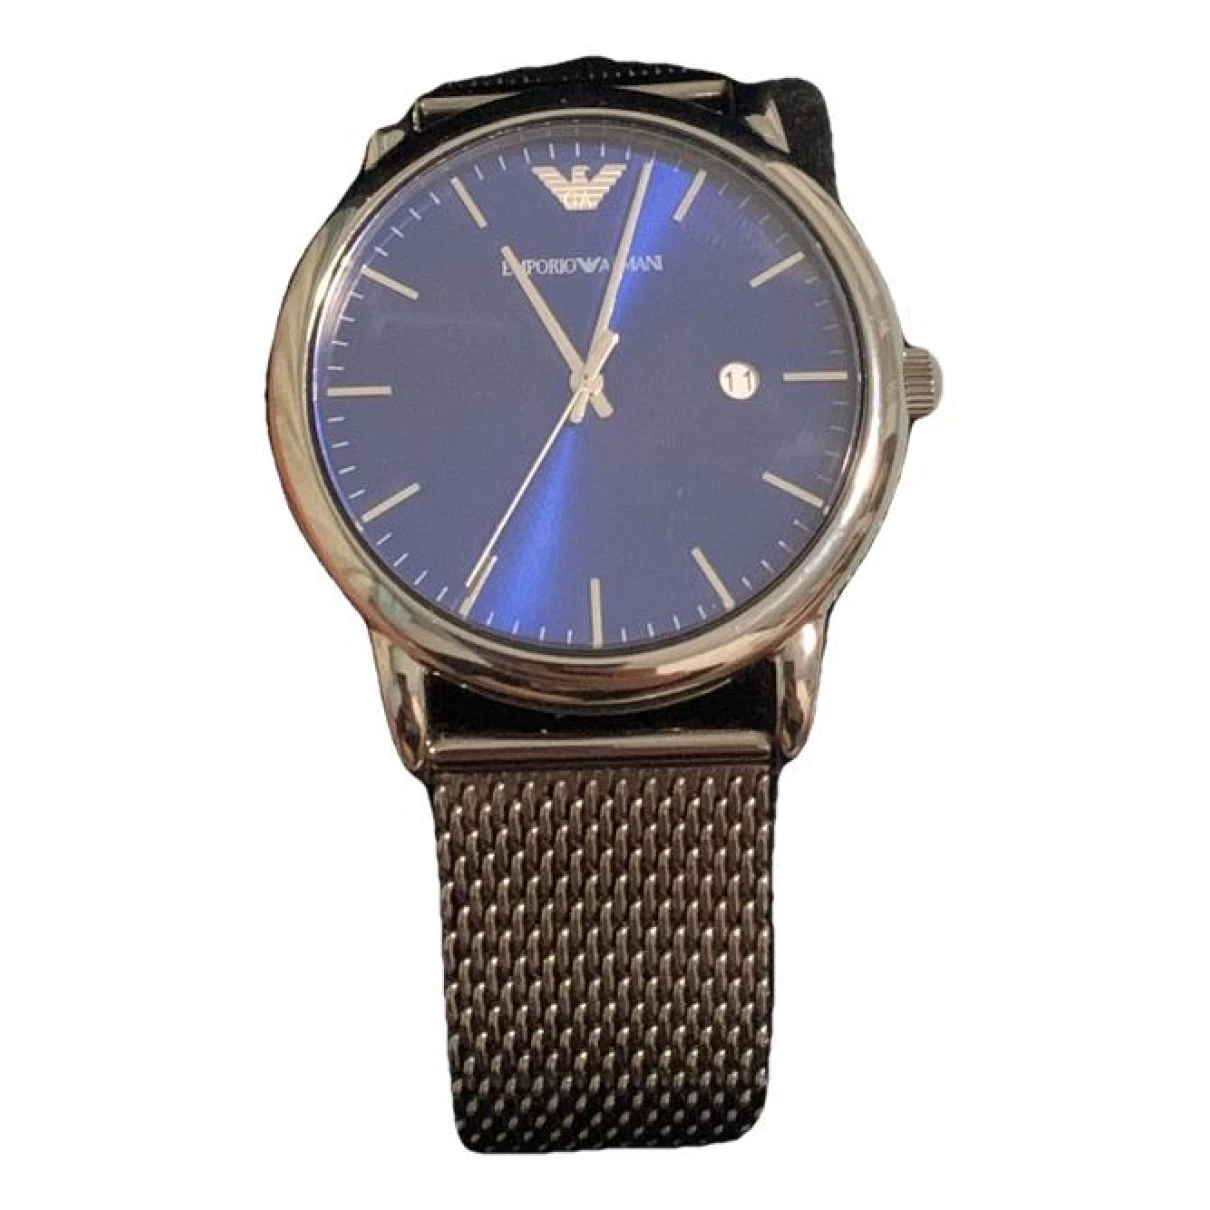 Pre-owned Emporio Armani Watch In Blue